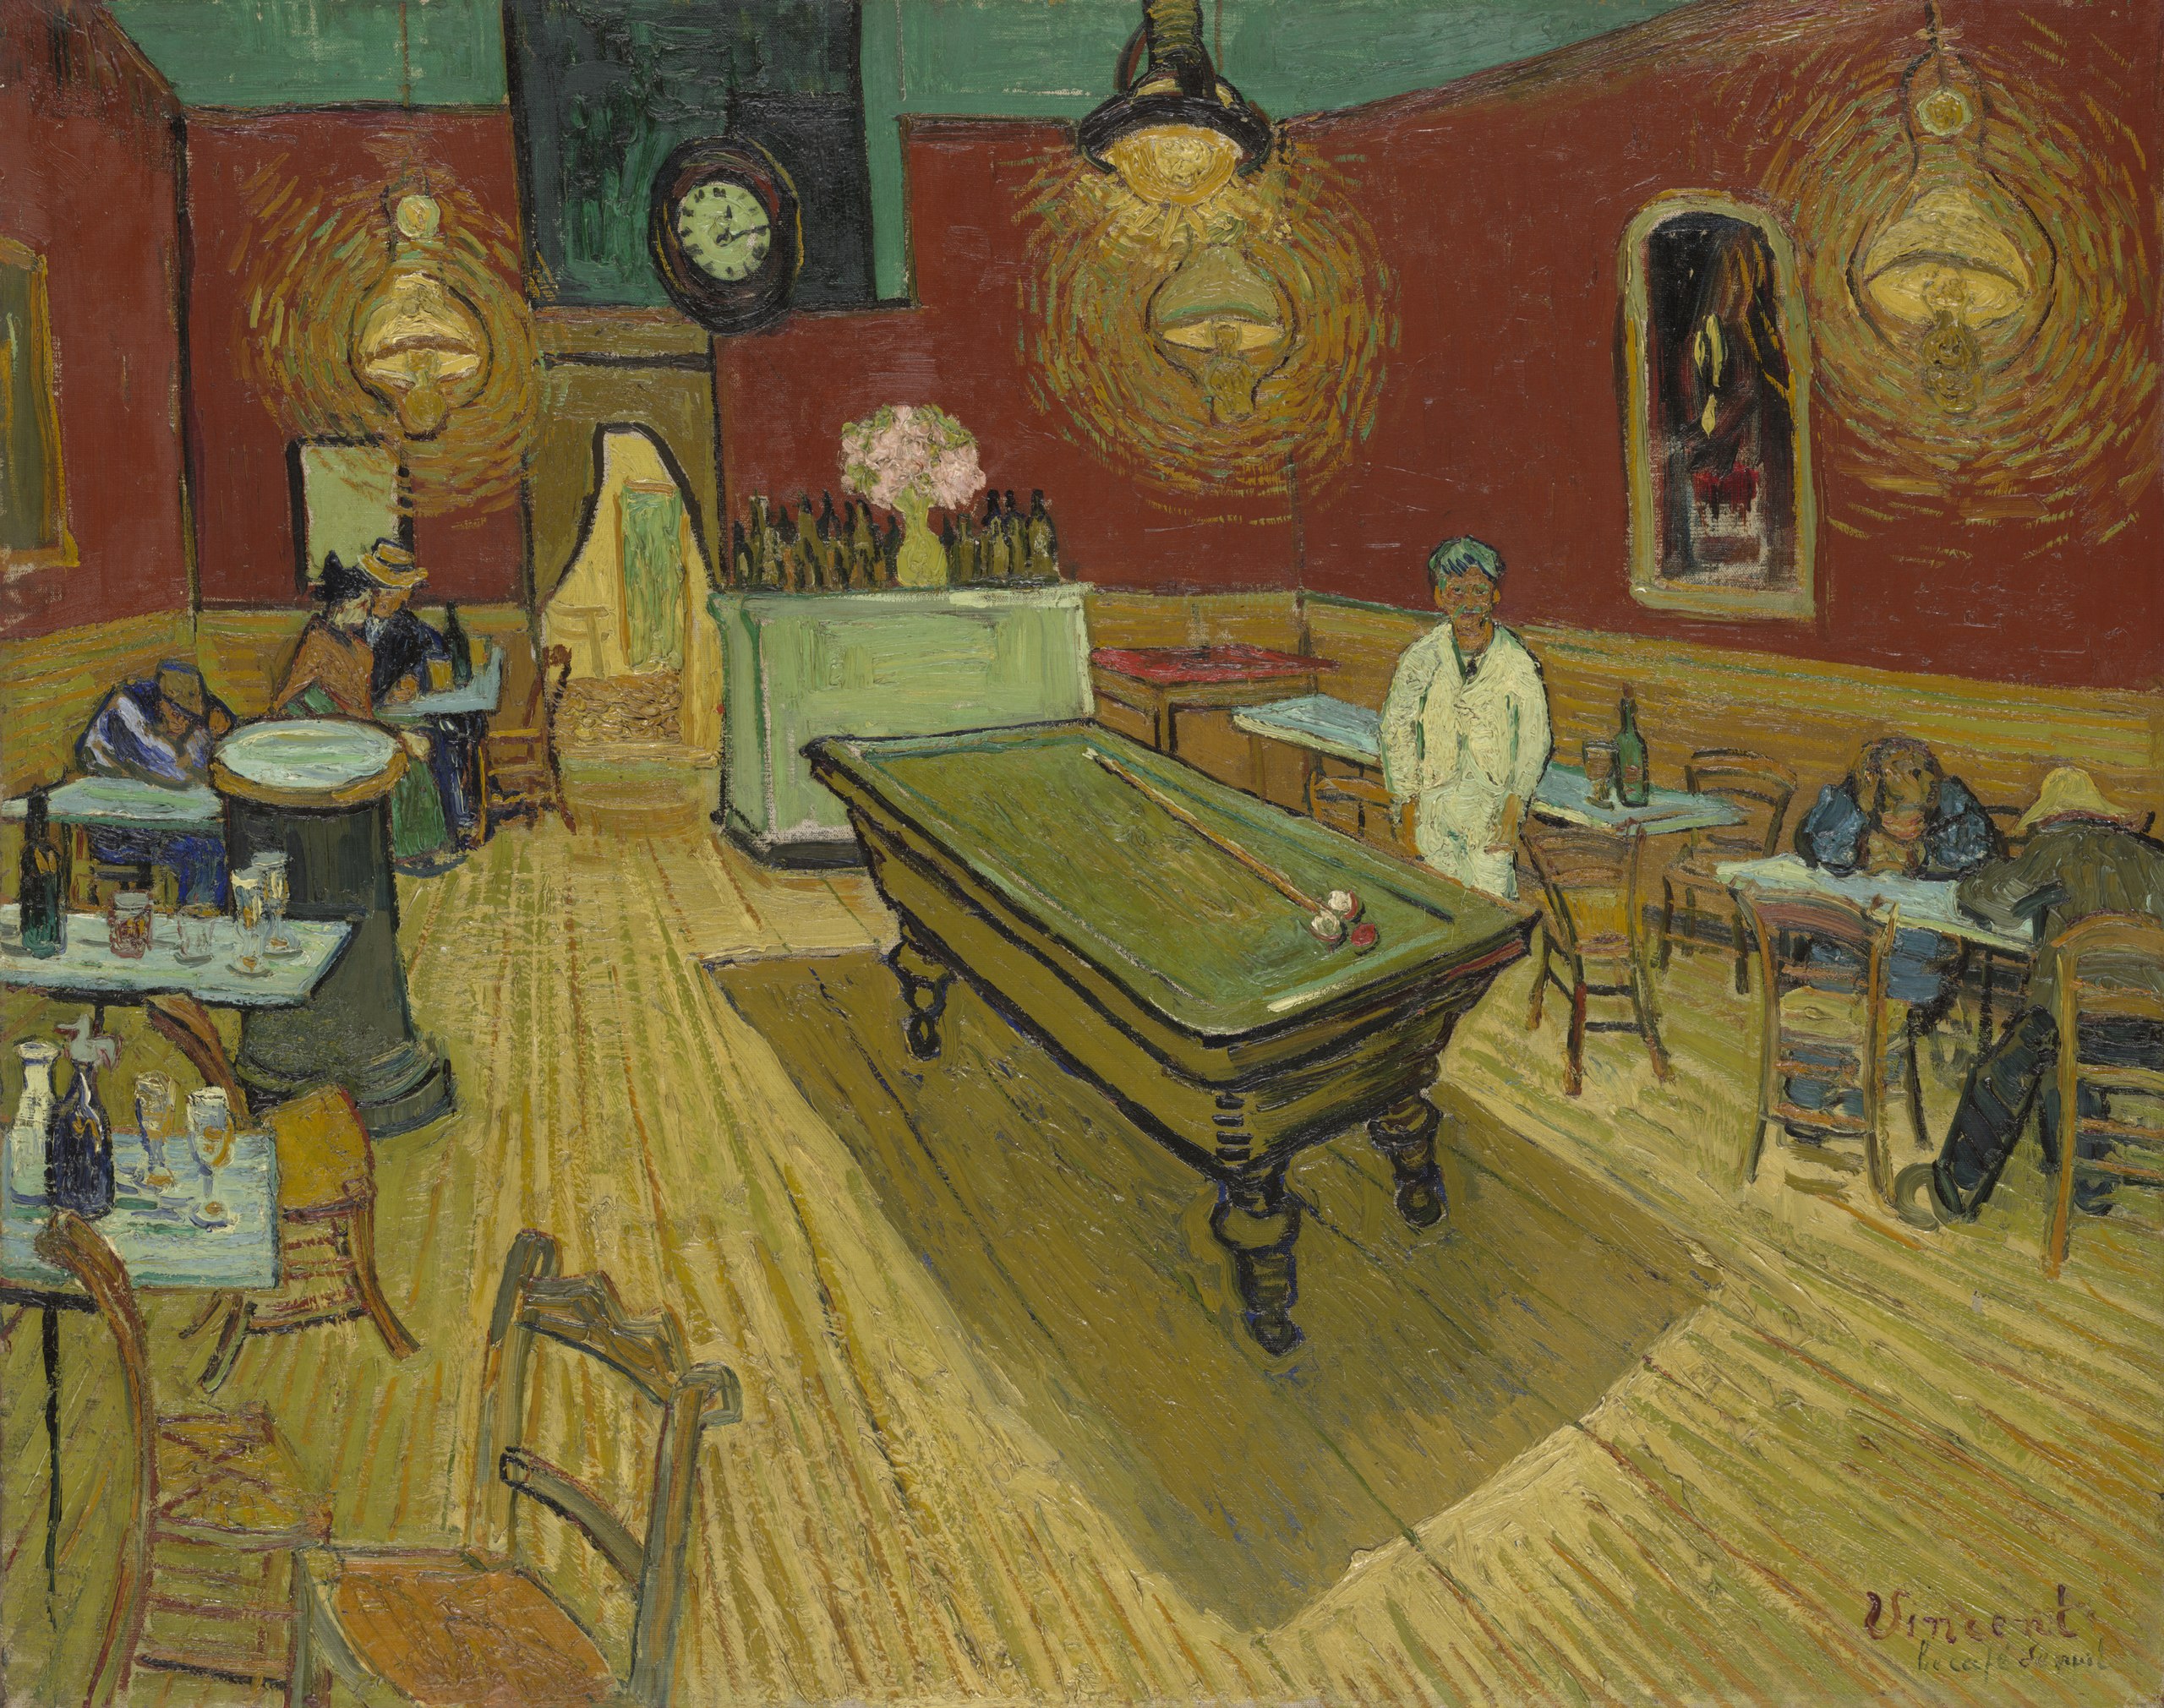 Vincent van Gogh (Russell painting) - Wikipedia